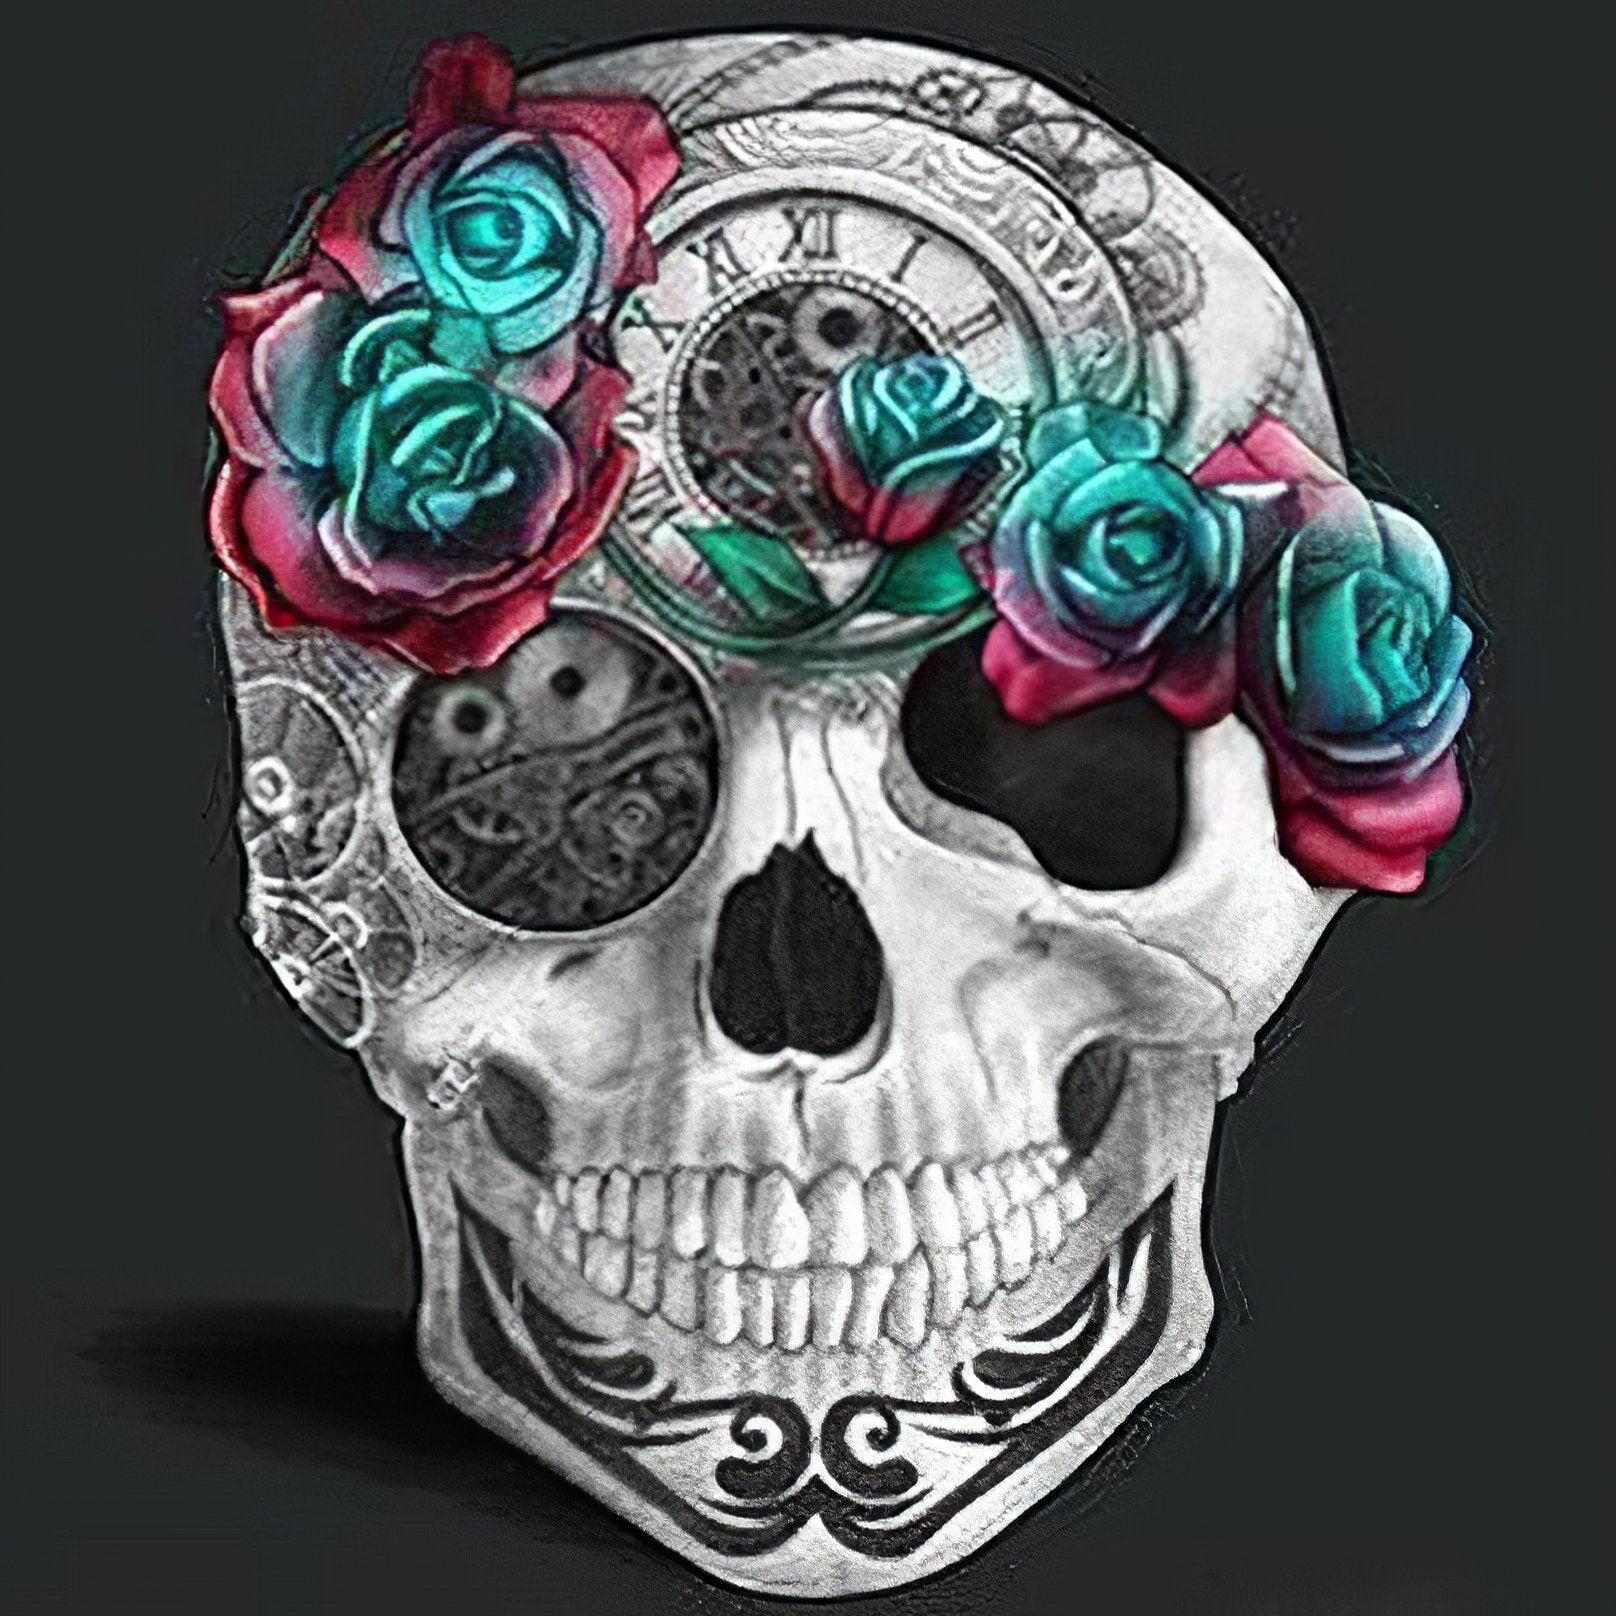 A Skull Decorated with Roses: Edgy elegance intertwined with floral beauty. A Skull Decorated With Roses - Diamondartlove